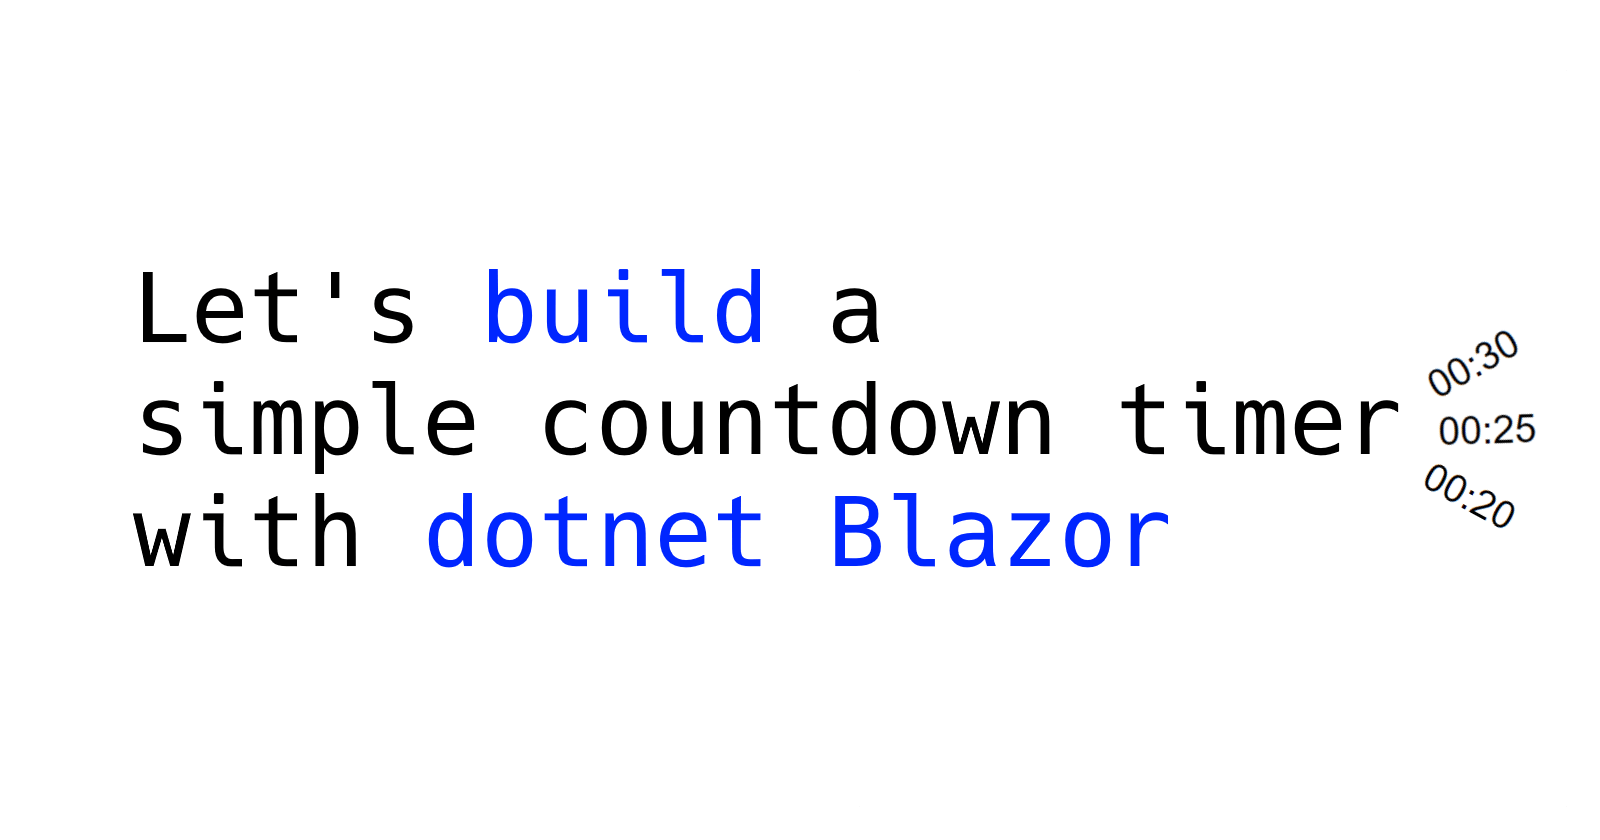 Let's build a simple countdown timer with dotnet Blazor